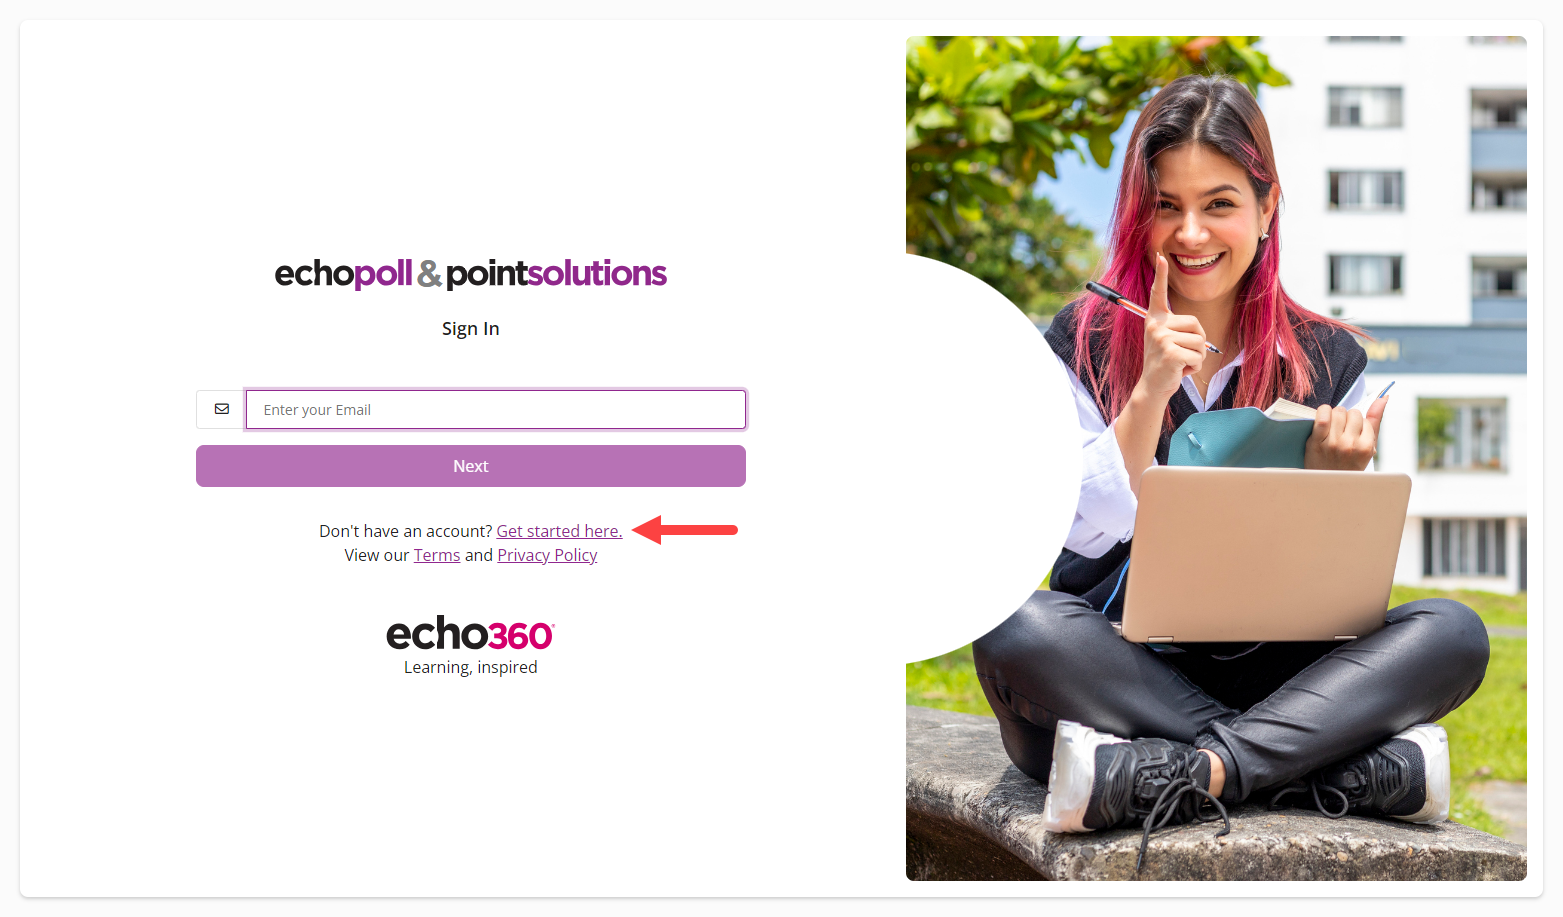 The EchoPoll and PointSolutions account log in screen with Get started here identified as described